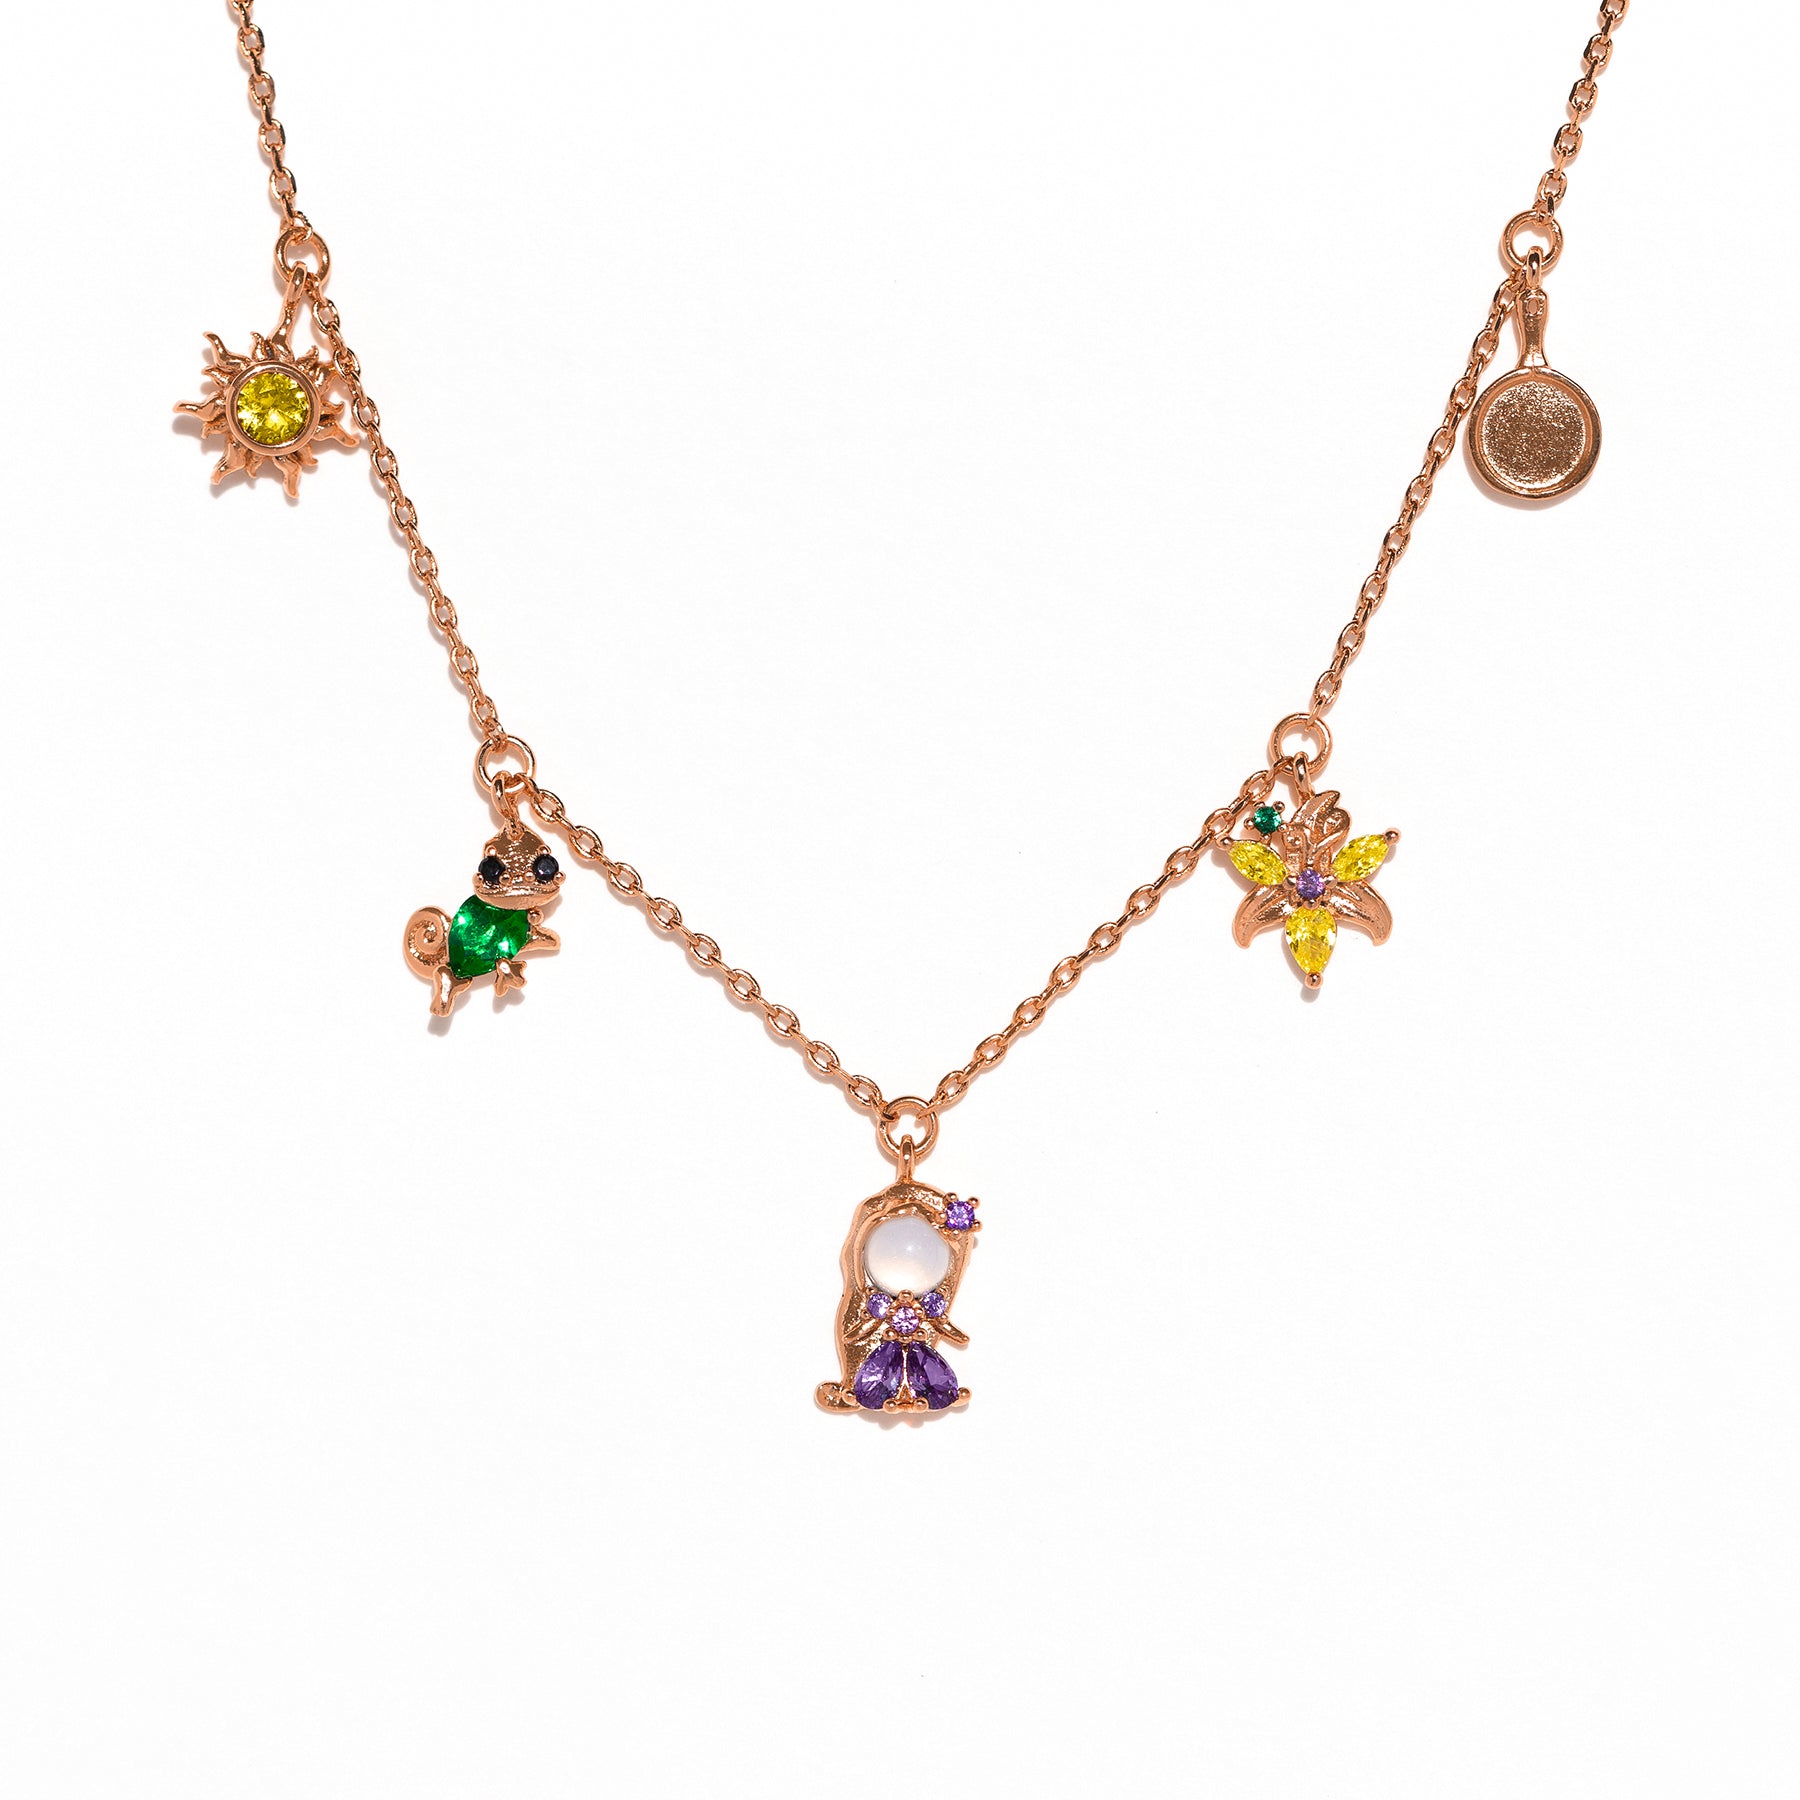 Disney Store Rapunzel Amethyst Necklace For Adults, Tangled | Disney Store